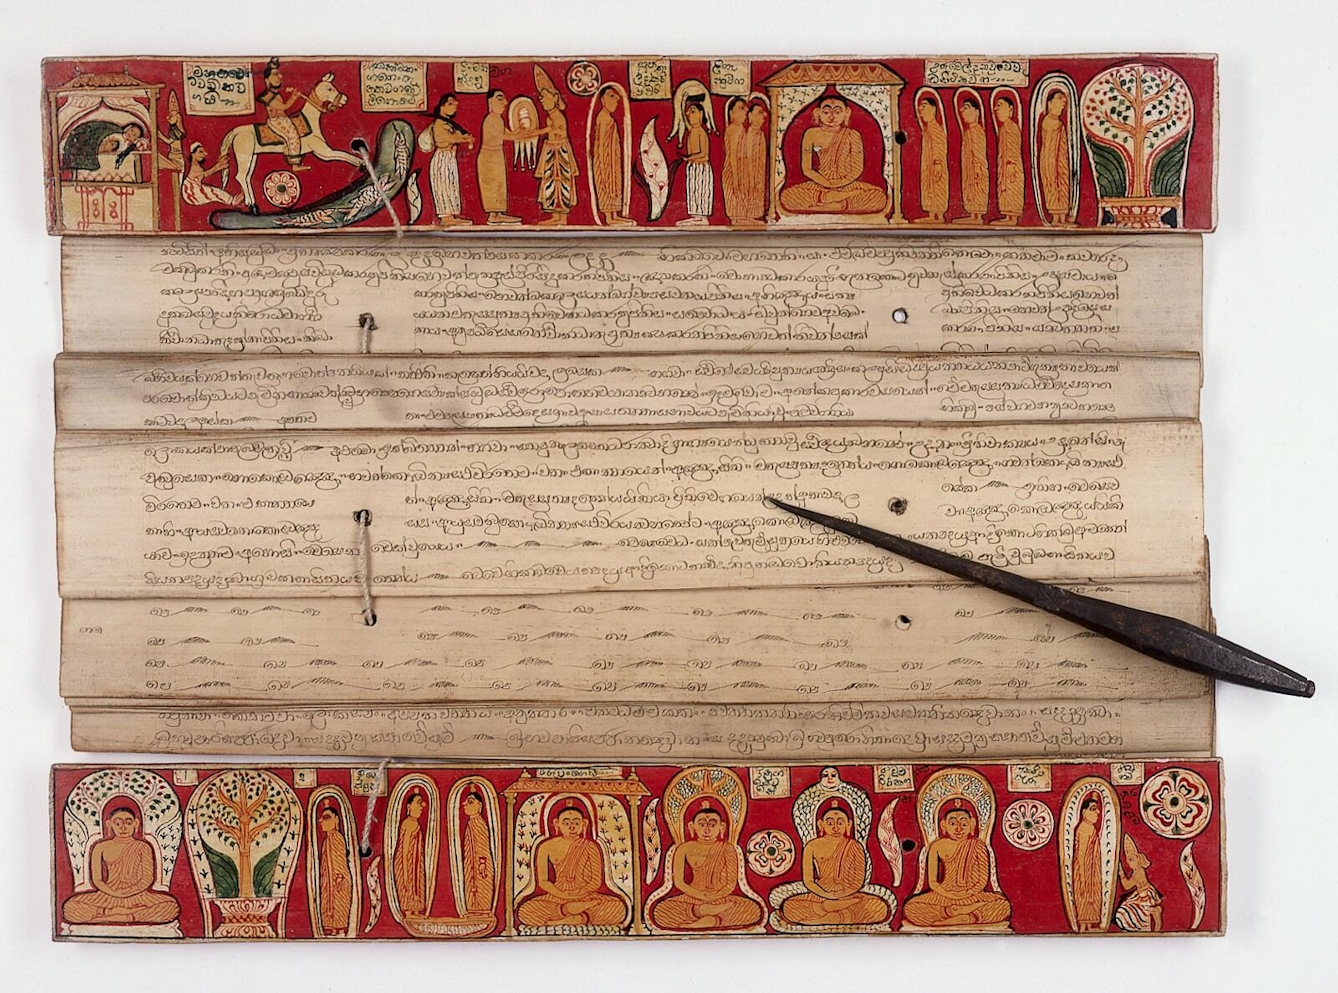 A Singhalese palm leaf manuscript with a brightly coloured painted wooden binding with images of teh Buddha. The manuscript is open to reveal the inscribed text on the palm leaves. A black wooden stylus lays across the leaves.